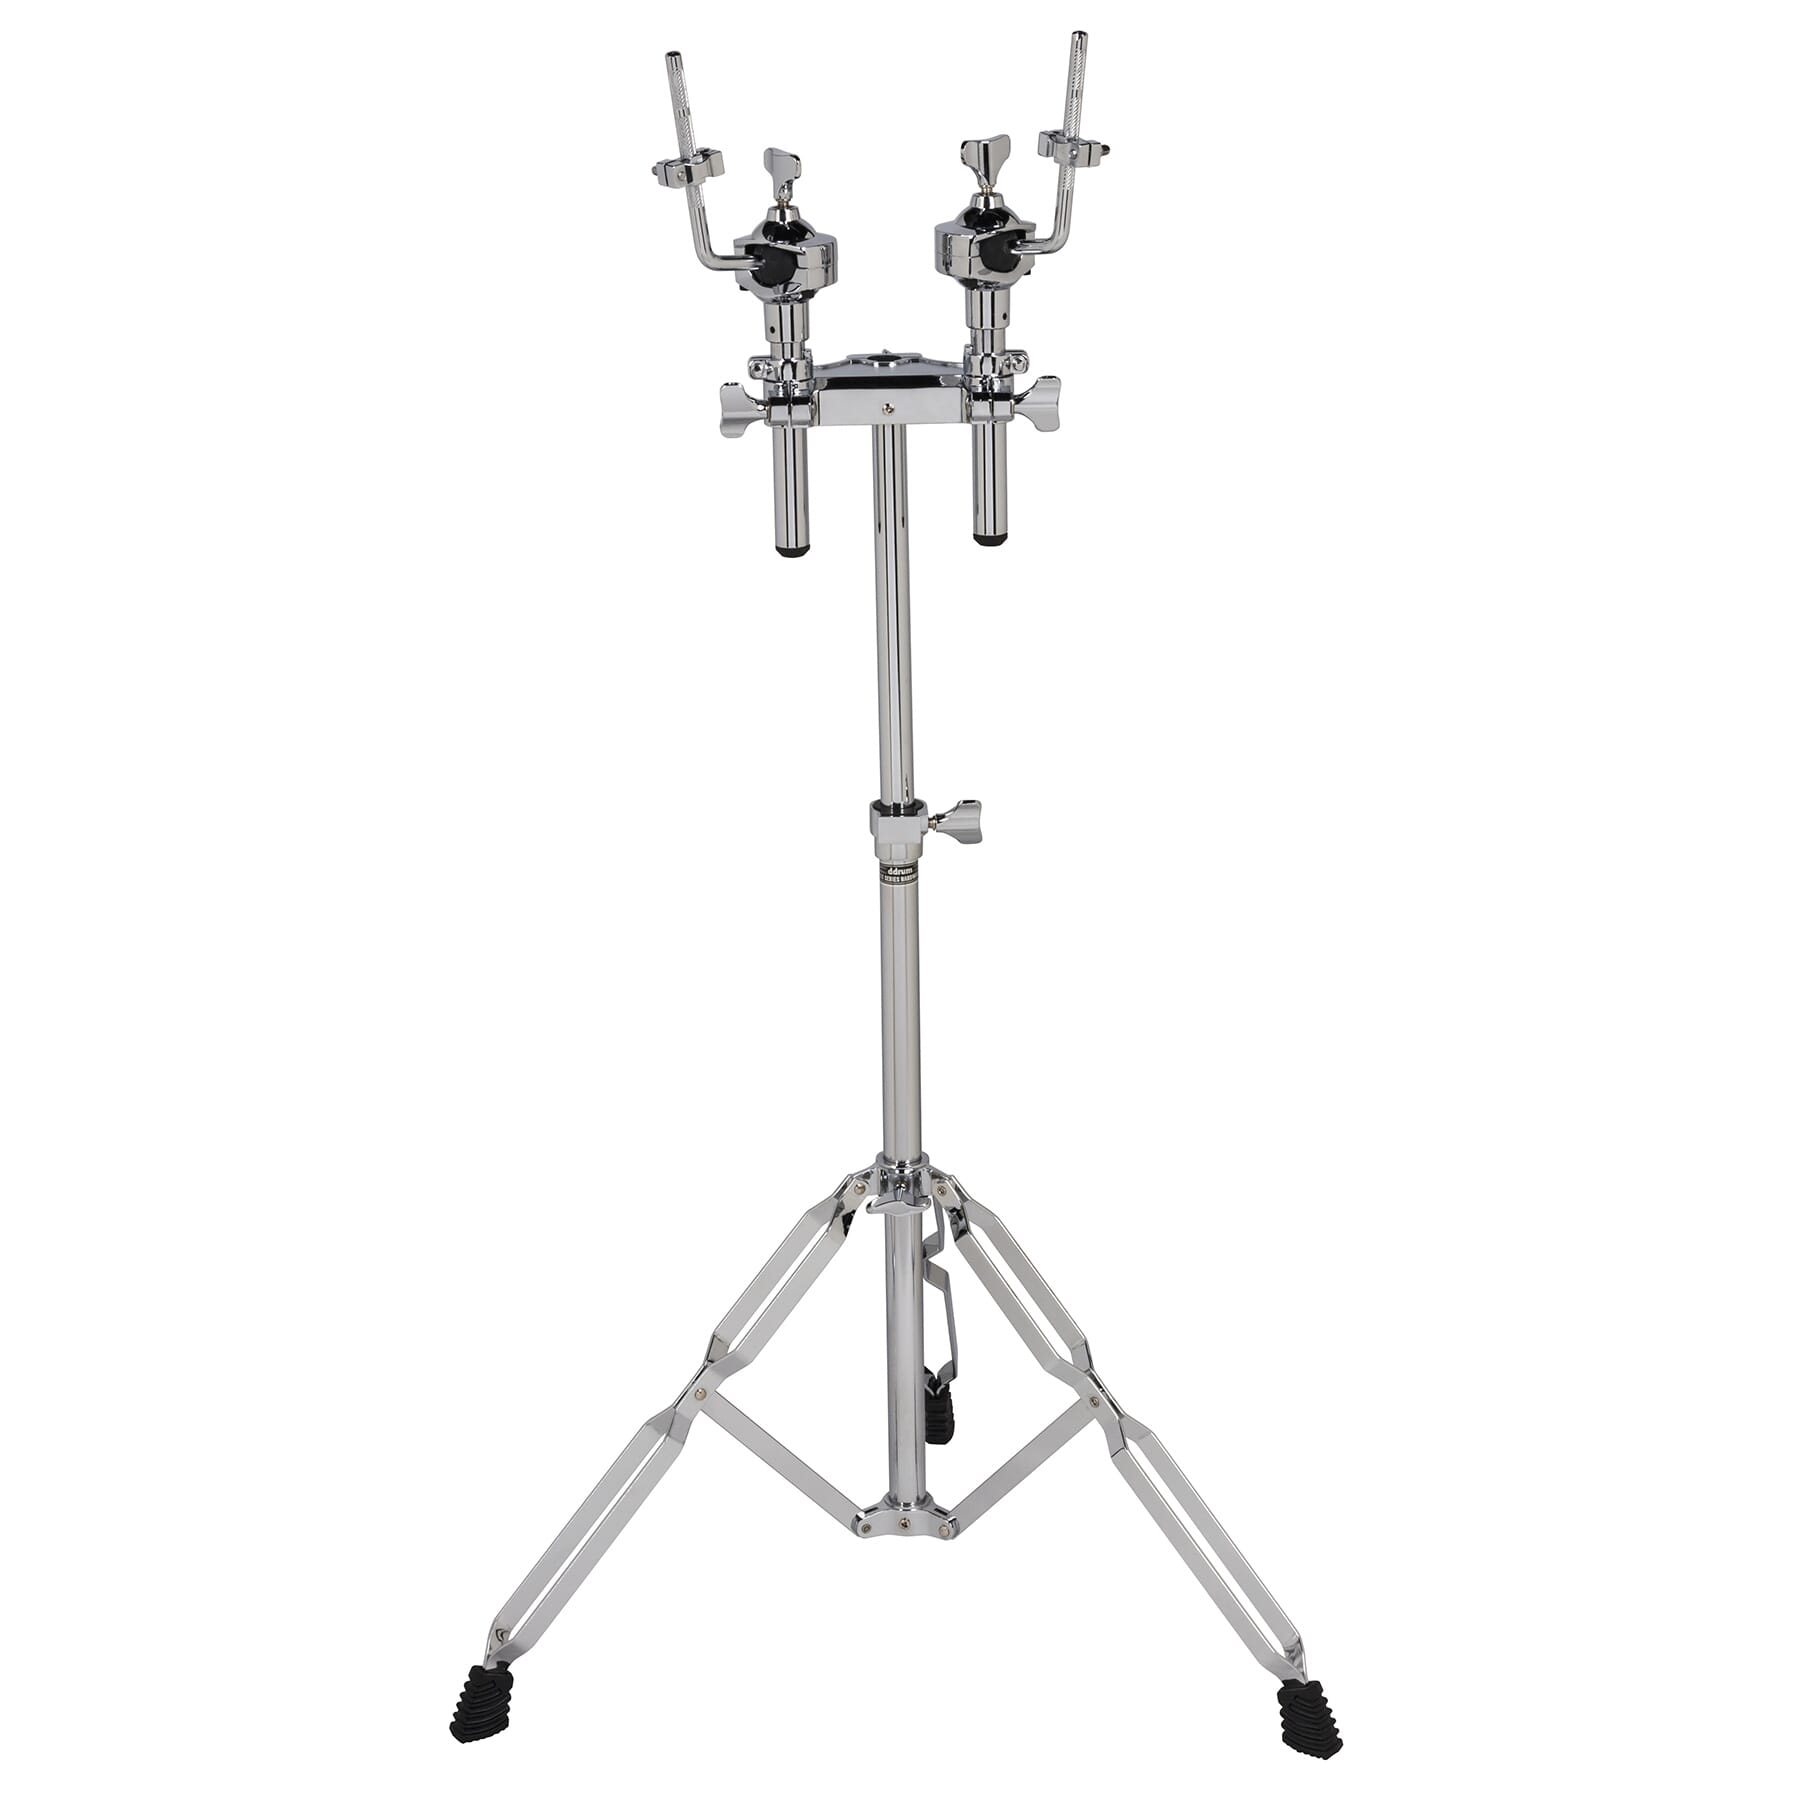 RX series Double tom tom stand | ddrum